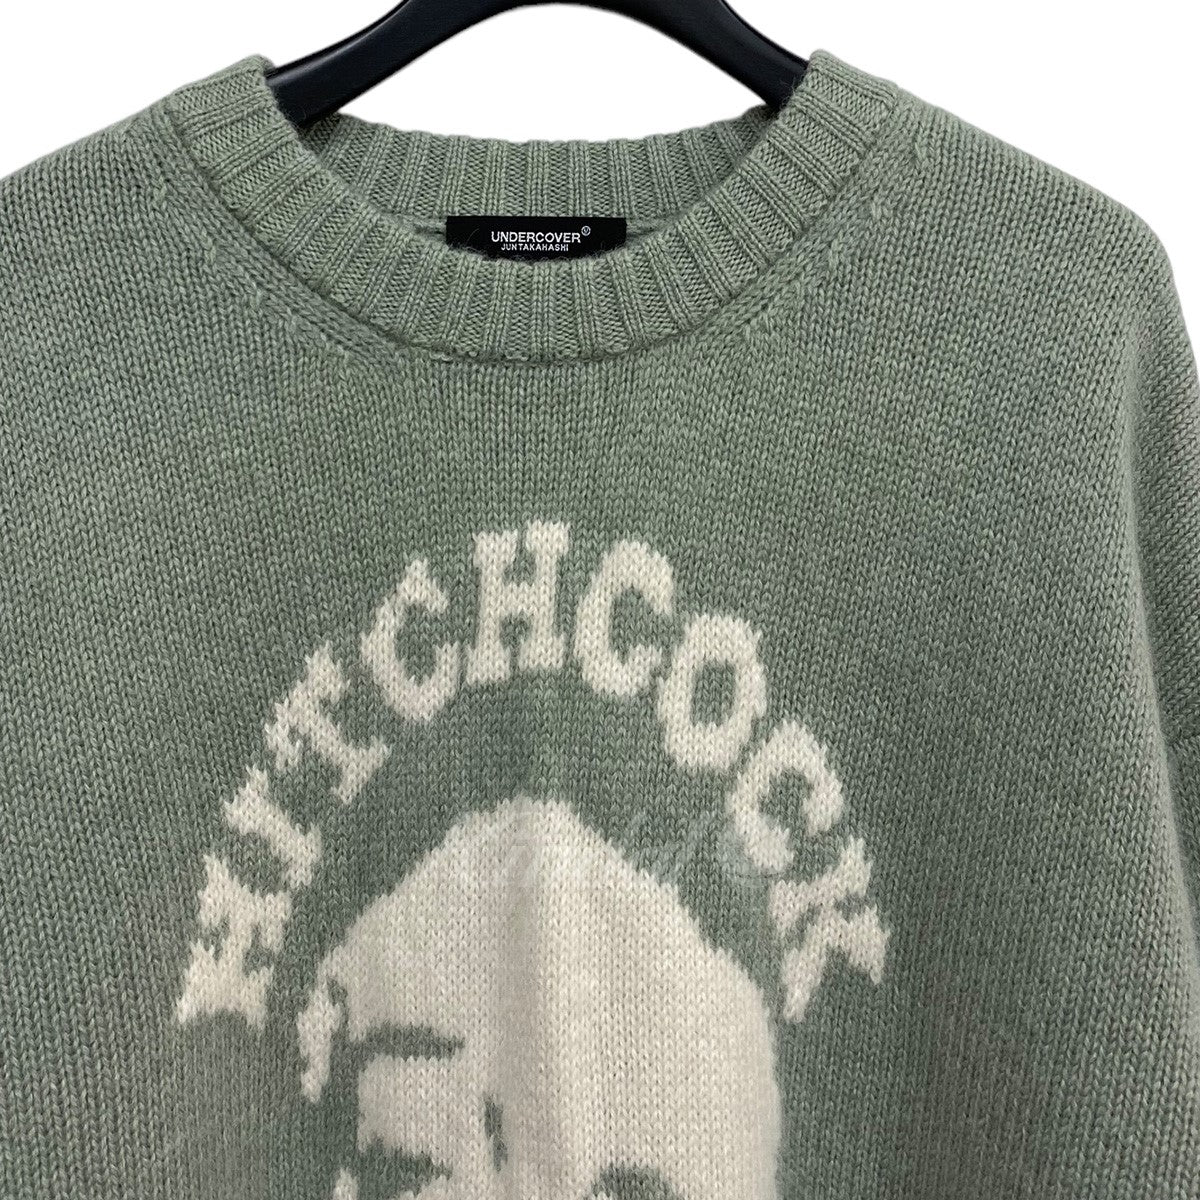 22AW Hitchcock Face Crewneck Knitヒッチコック刺繍ニットセーター